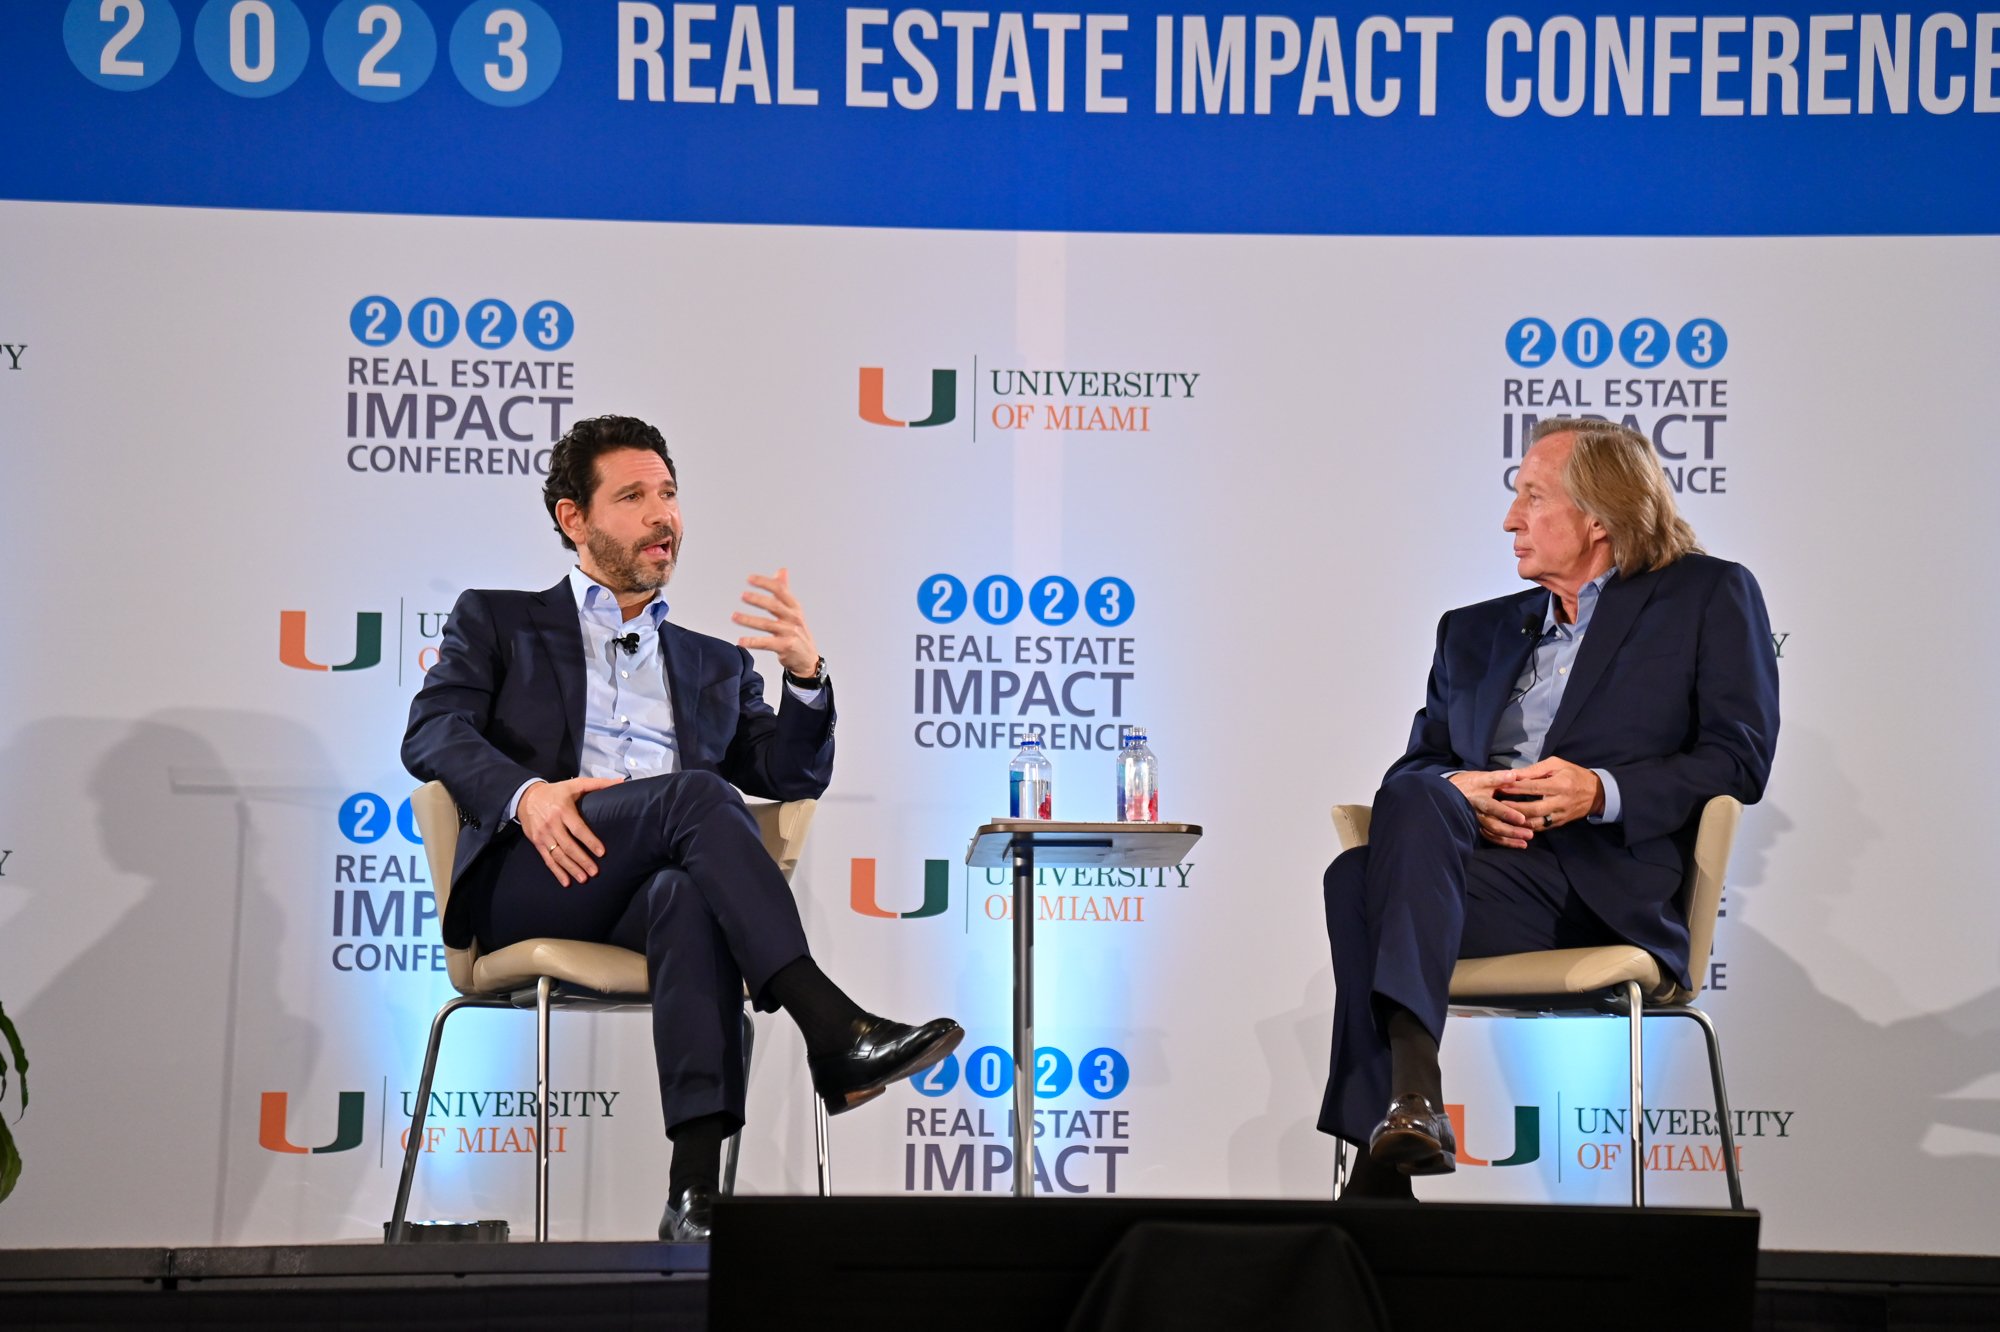 University of Miami Real Estate Impact Conference 2023 The Largest Edition Yet As Real Estate Leaders Discuss The State of Miami Real Estate 1,114.jpg